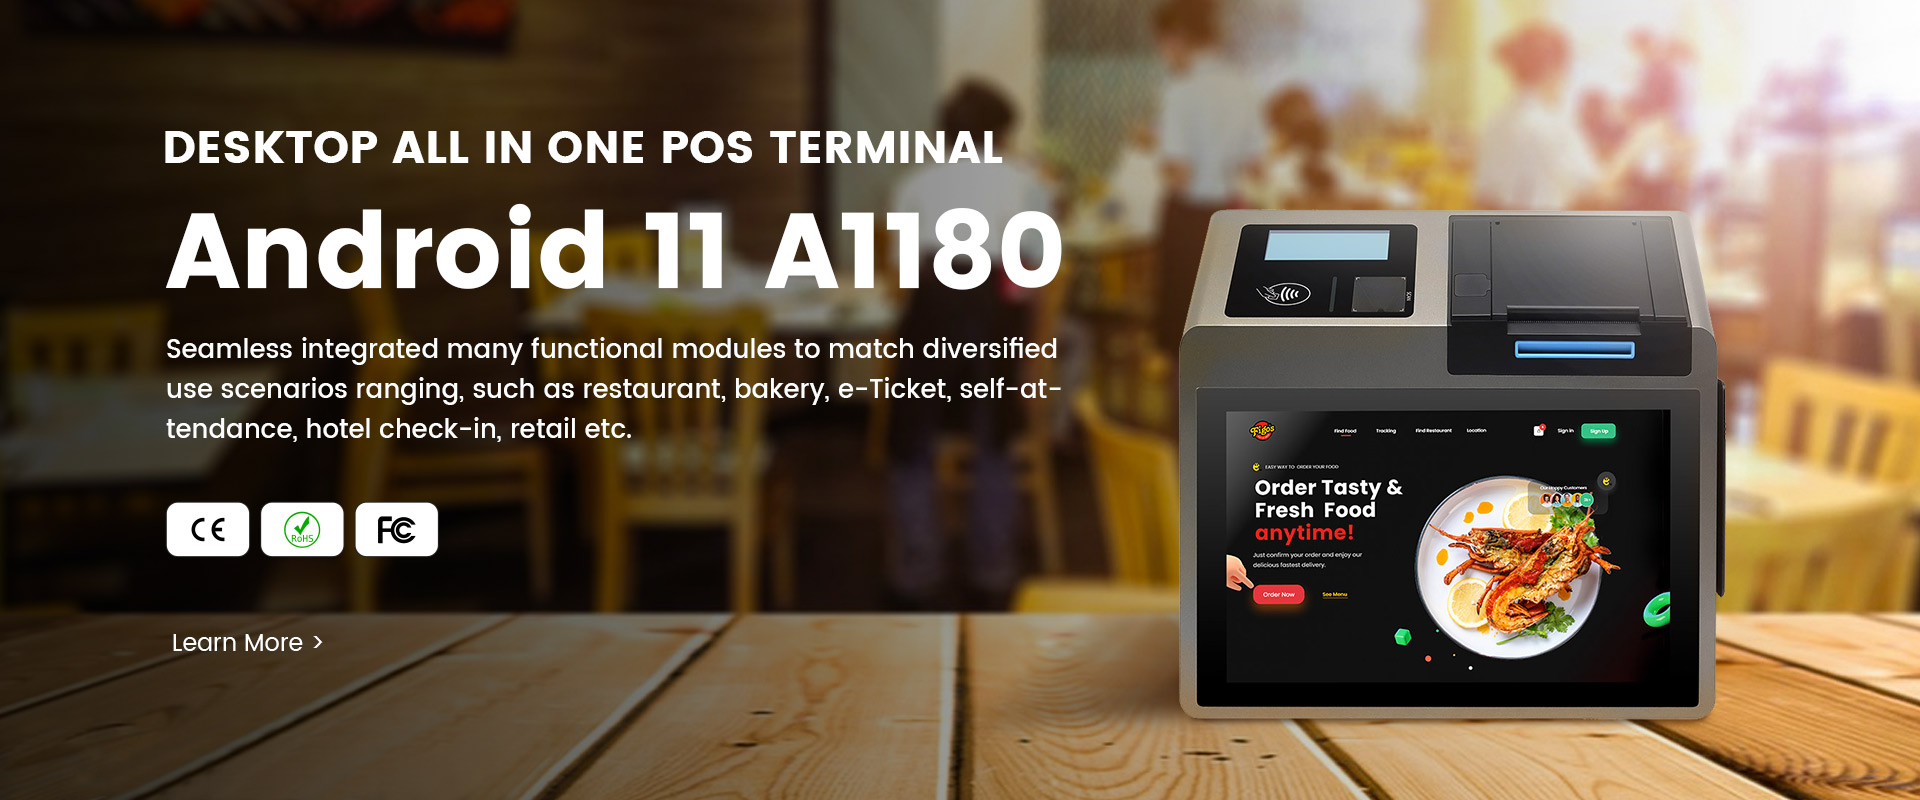  All in on Pos Terminal 